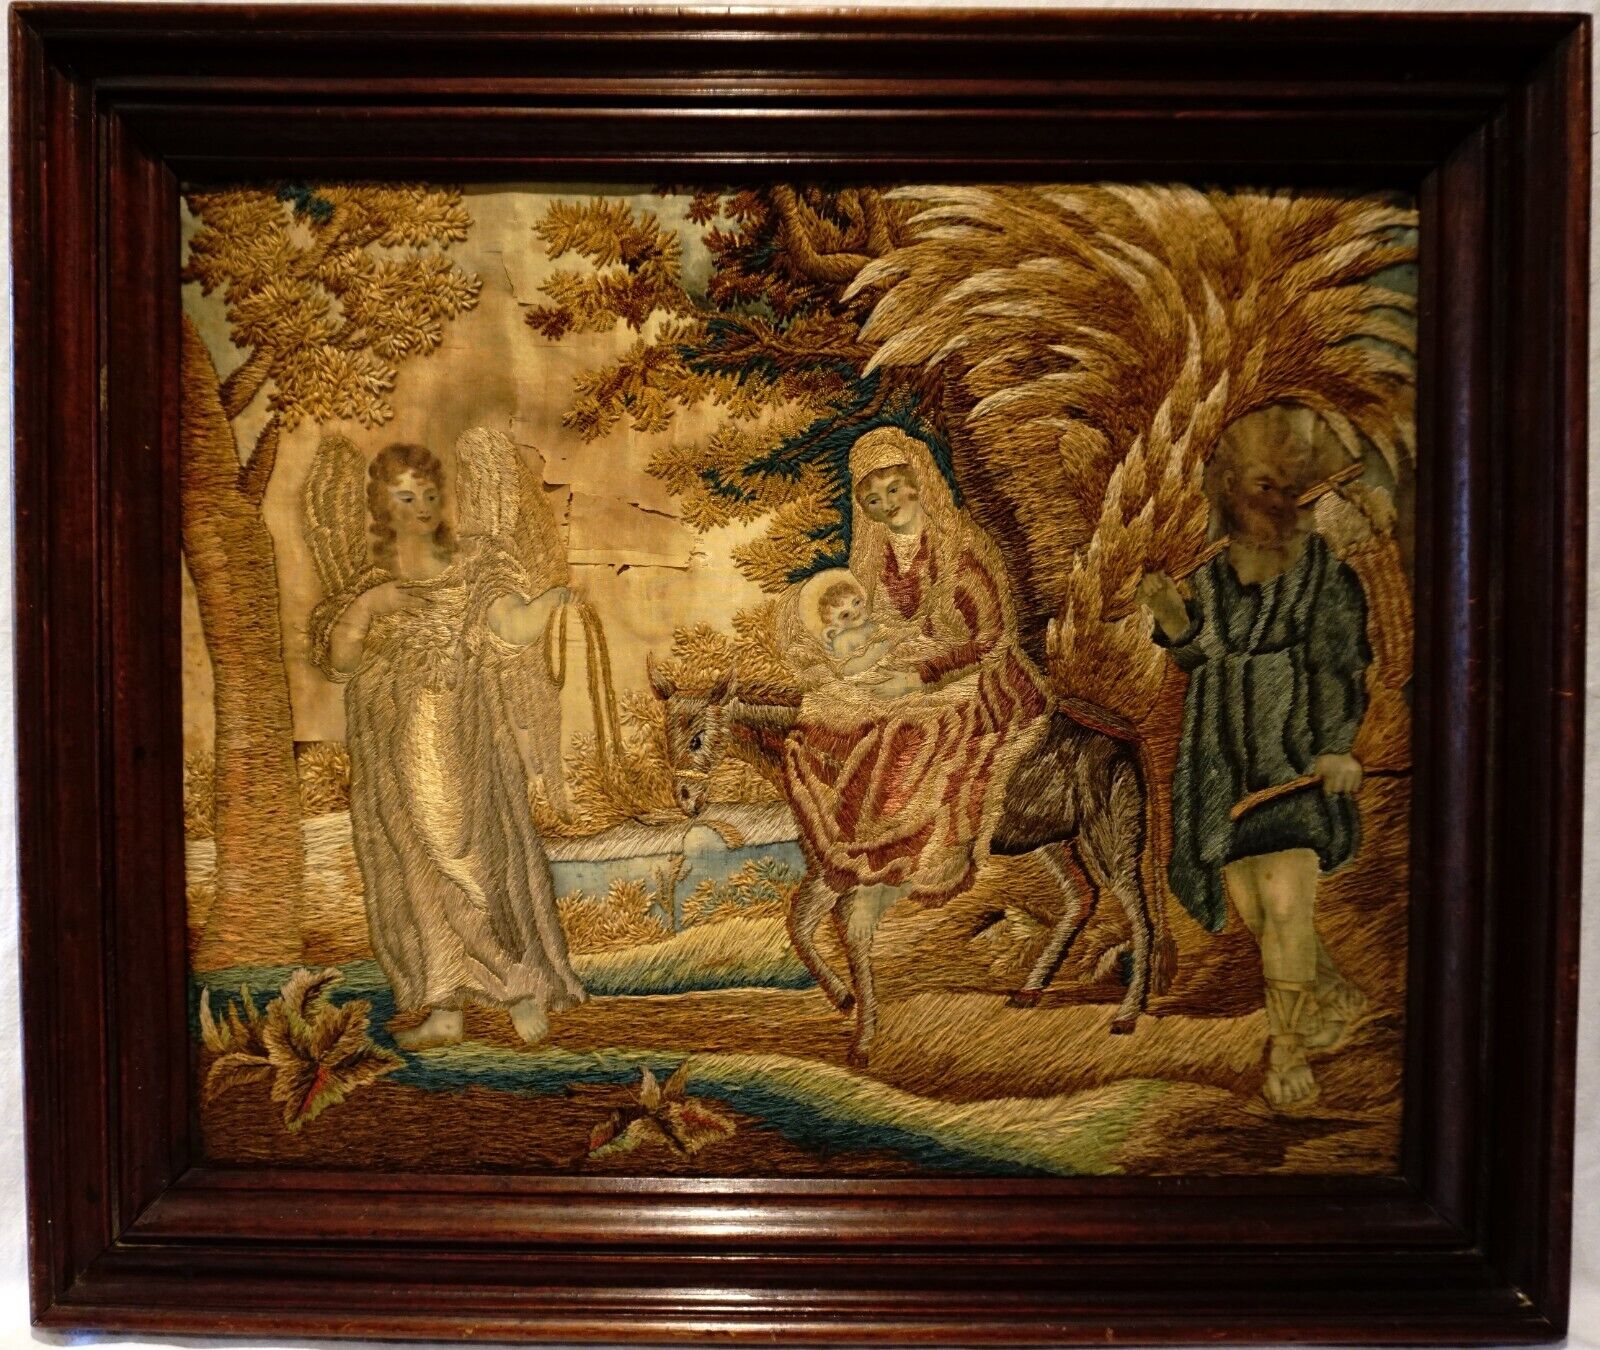 EARLY 19TH CENTURY NEEDLEWORK OF THE HOLY FAMILY'S FLIGHT INTO EGYPT - c.1830